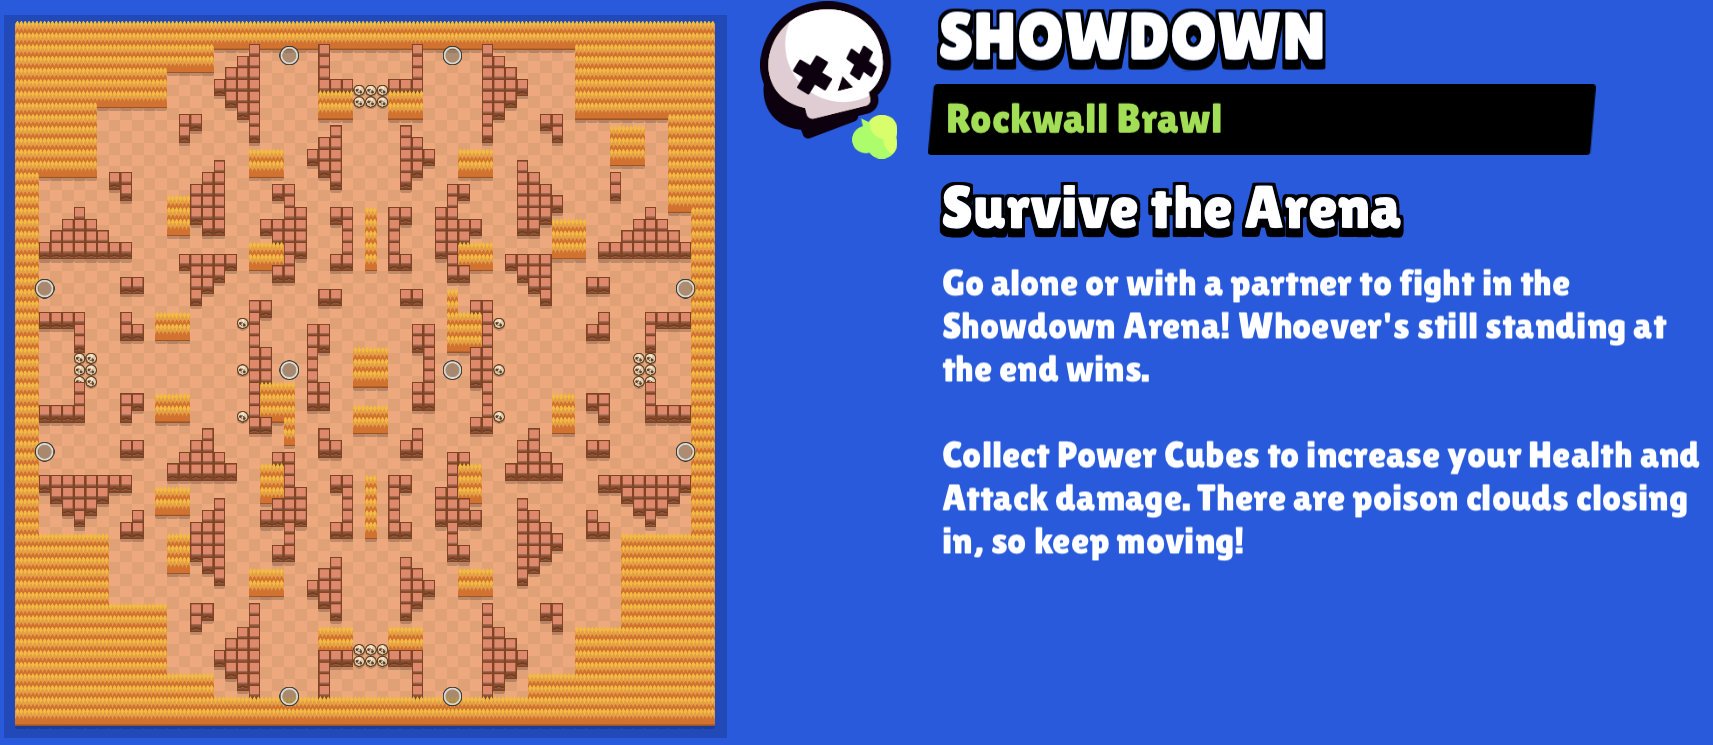 Code Ashbs On Twitter Rockwall Brawl Showdown Is Today S Map For Power Play Here Are The Best Brawlers To Use Crow Extra Toxic Leon Invisiheal 8 Bit Extra Life Shelly Band Aid Carl - brawl stars rockwall brawl best brawlers